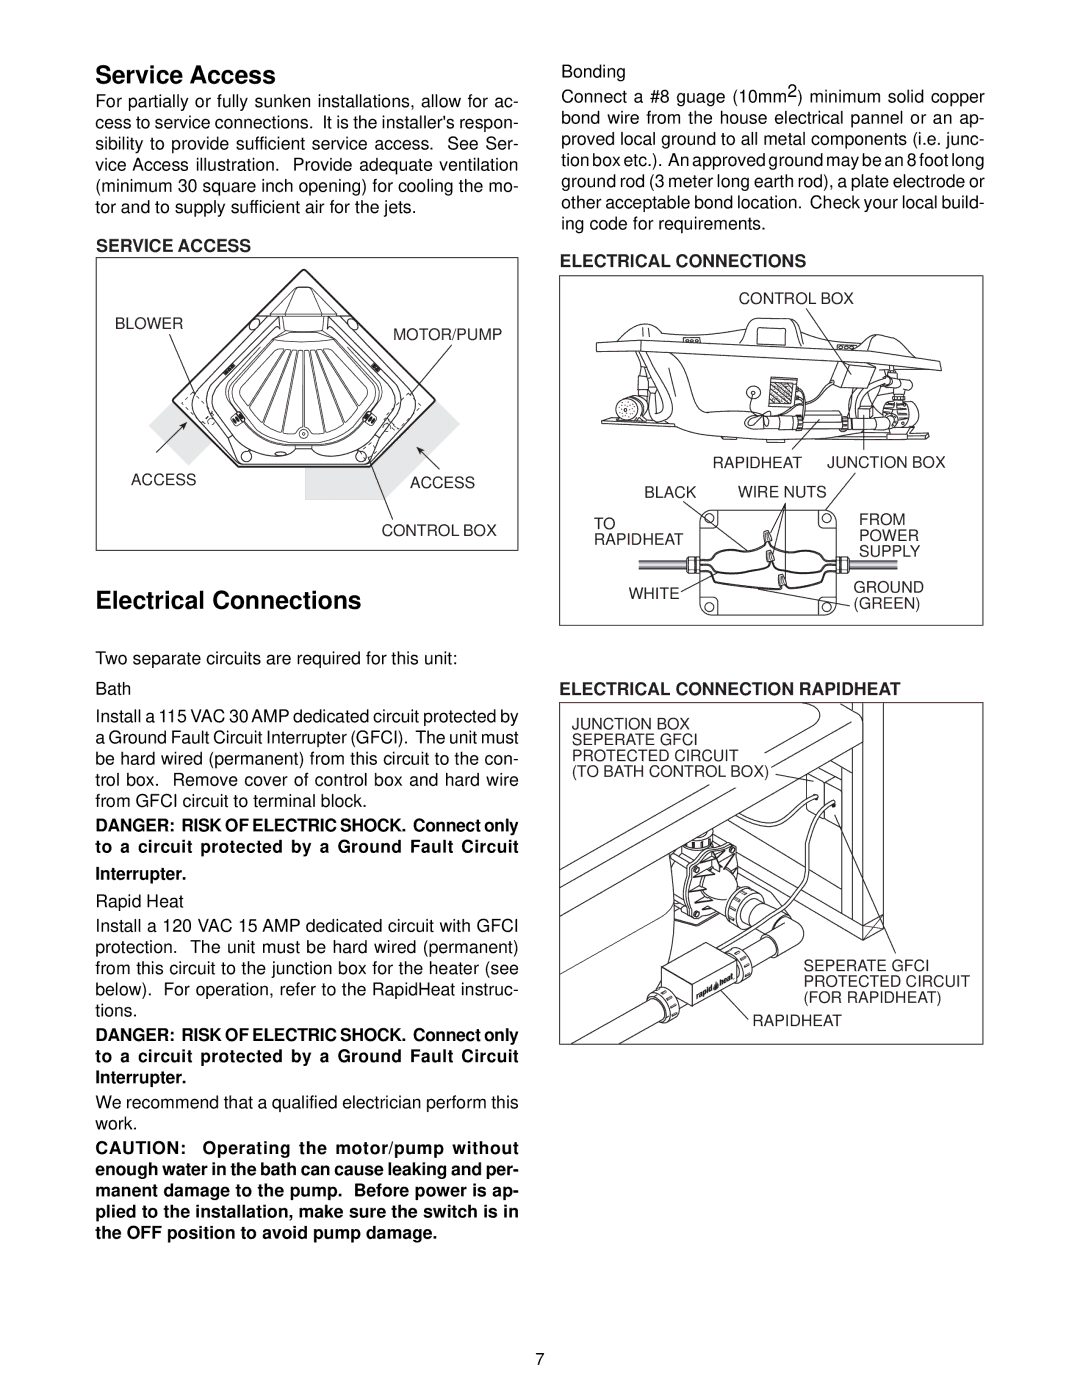 Jacuzzi S198 owner manual Service Access, Electrical Connections 